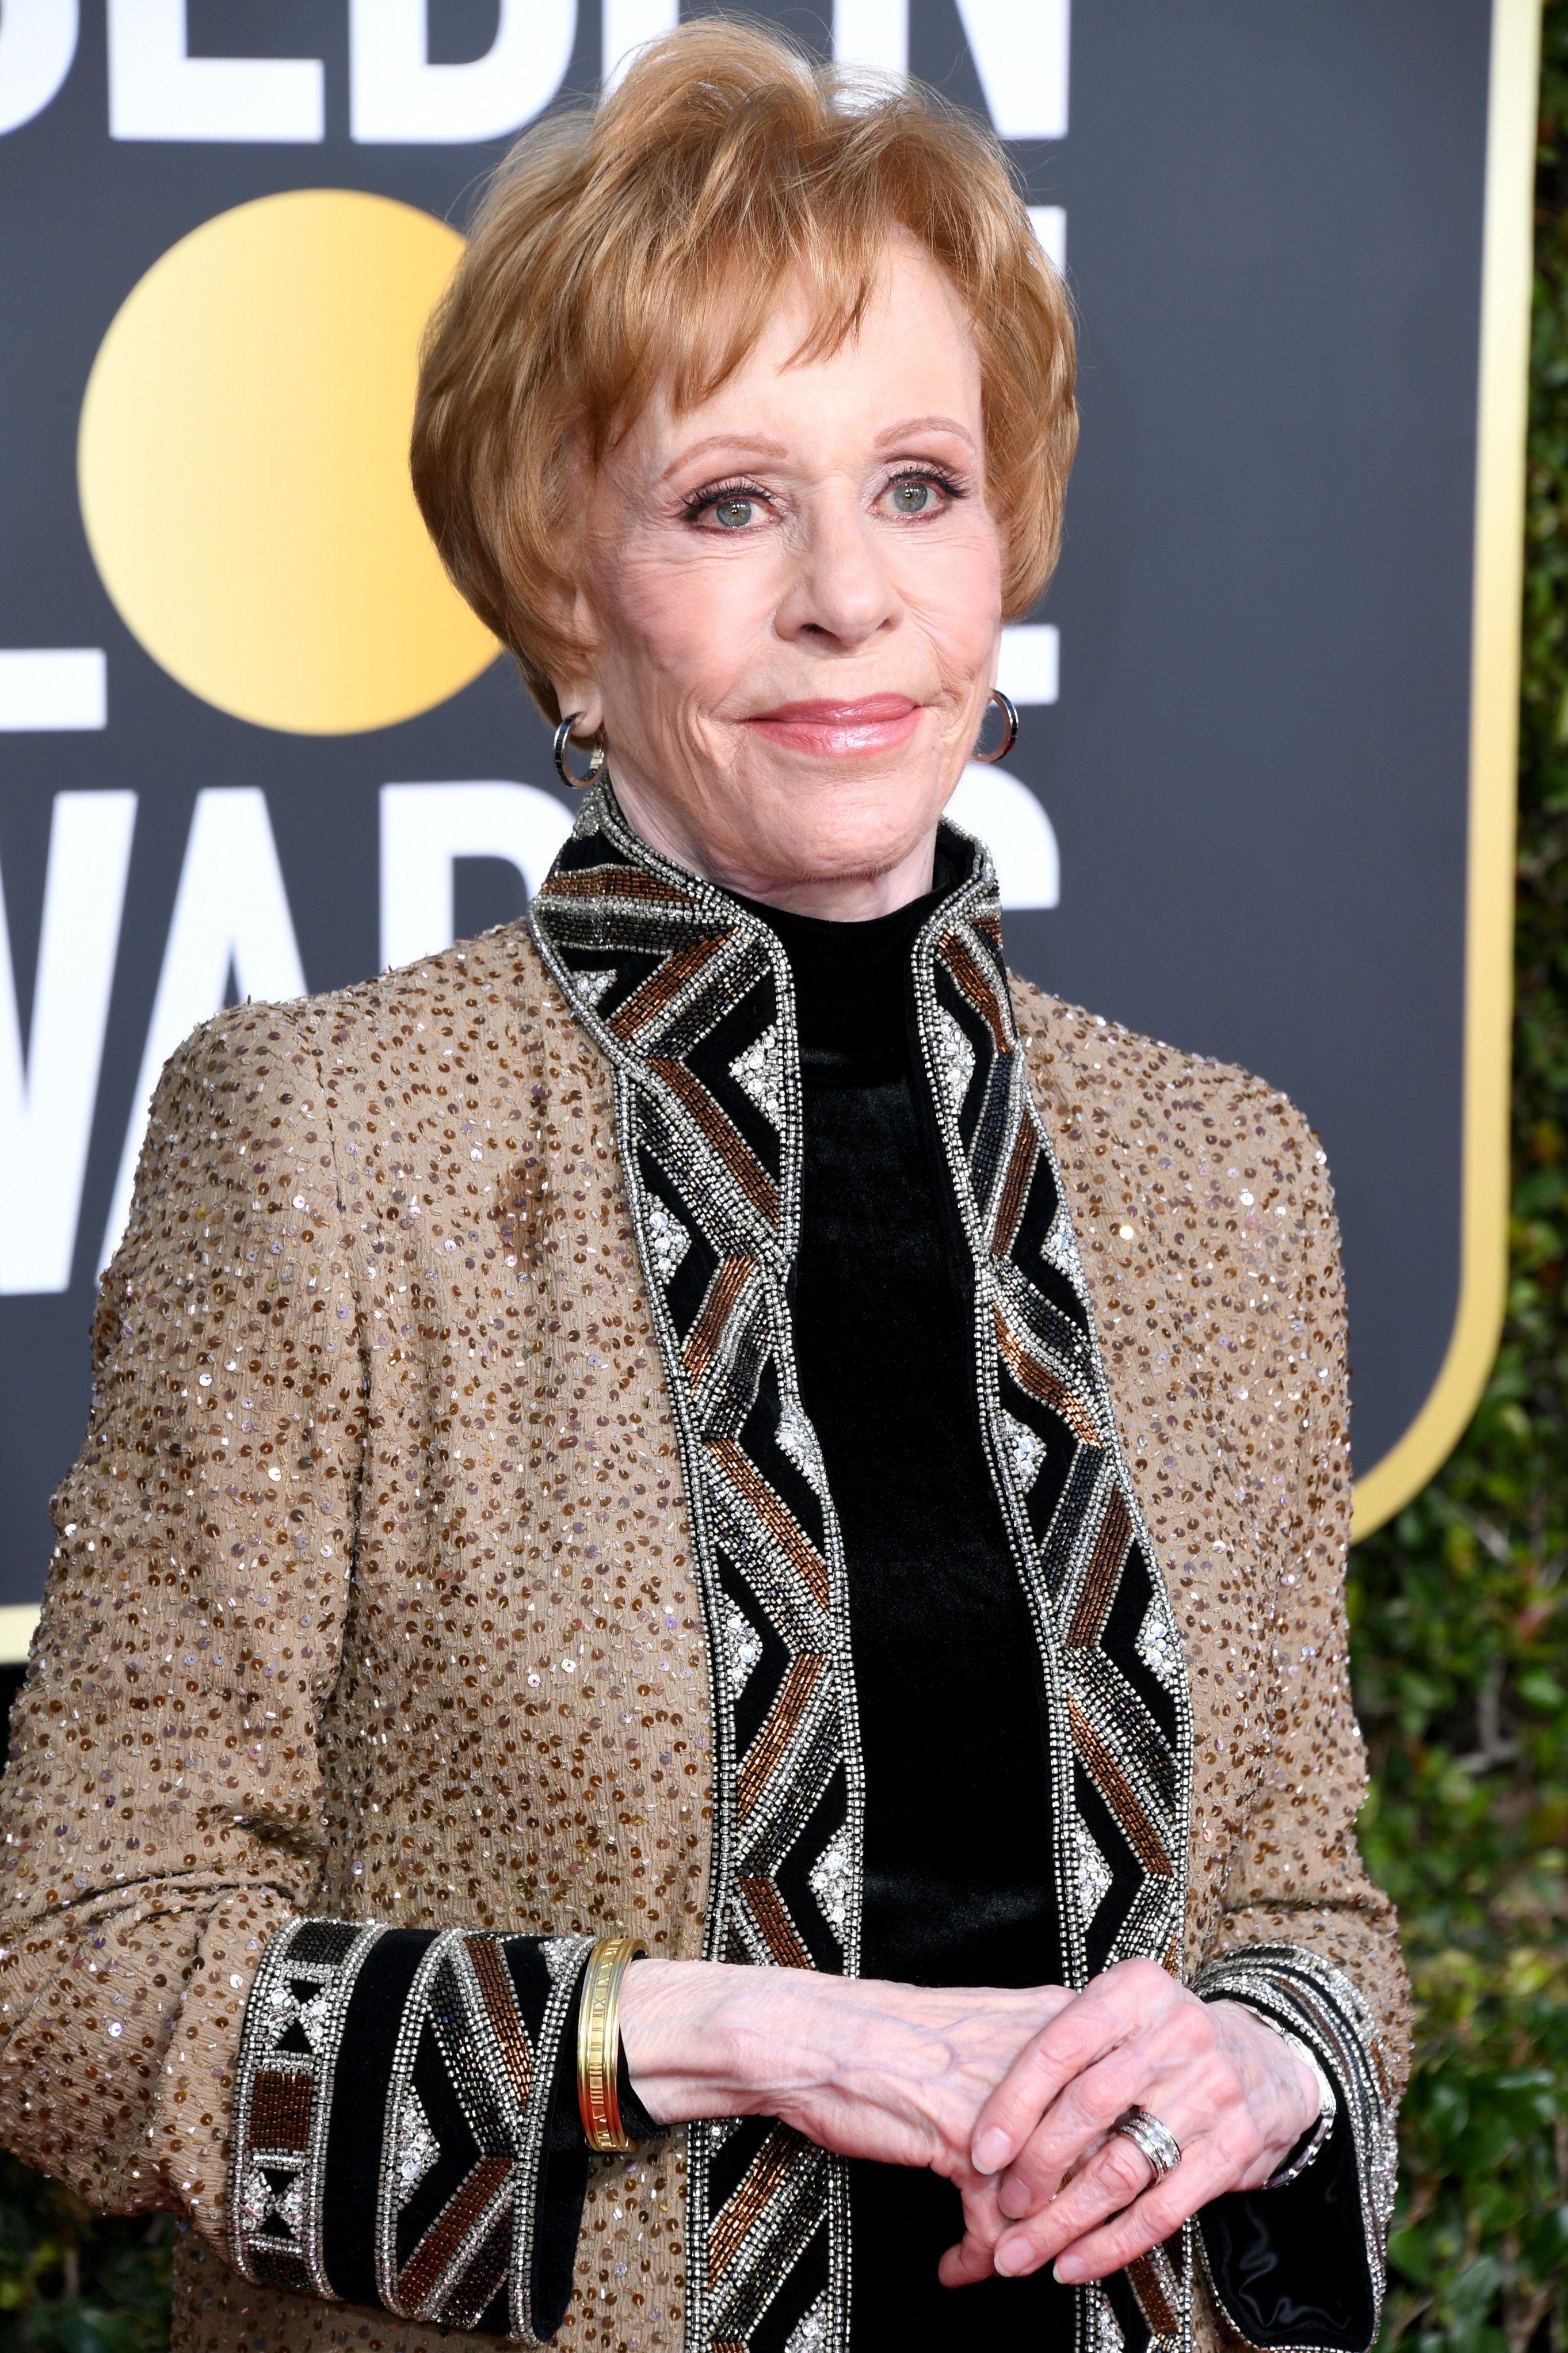 Carol Burnett at the 76th Annual Golden Globe Awards on January 6, 2019 | Photo: GettyImages